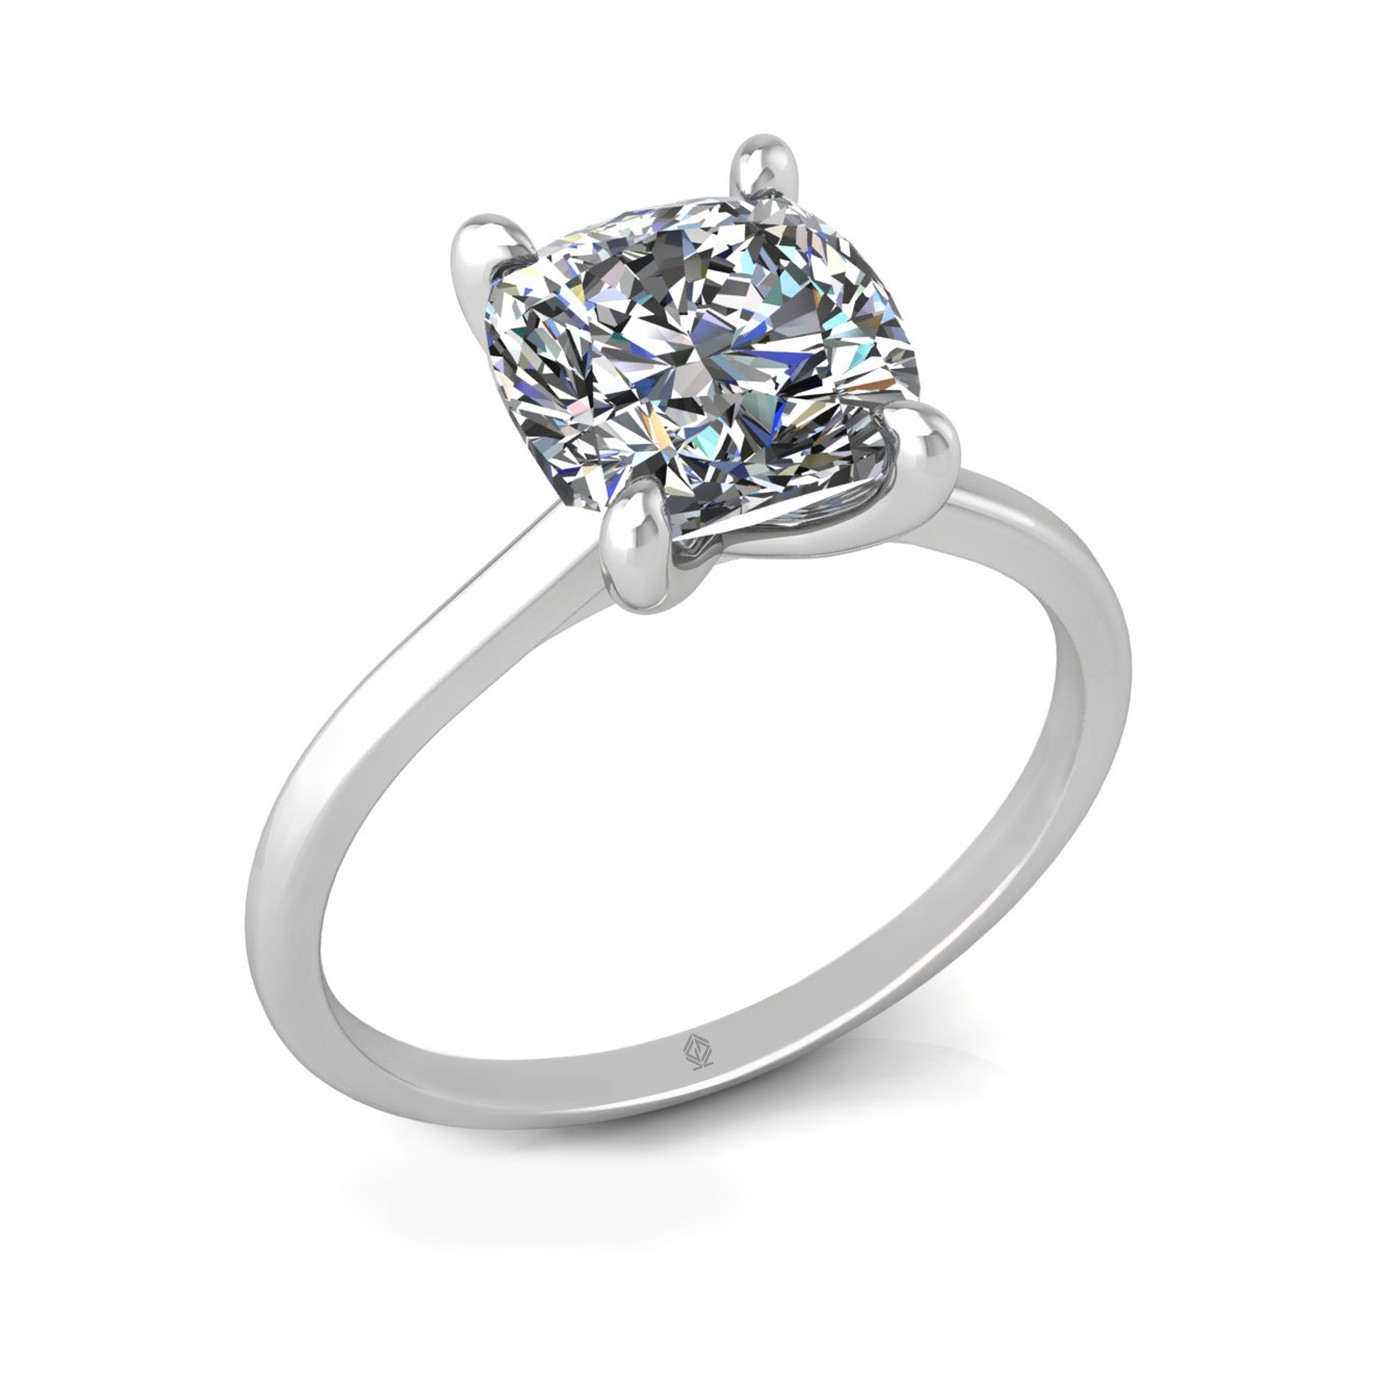 18k white gold 2.5ct 4 prongs solitaire cushion cut diamond engagement ring with whisper thin band